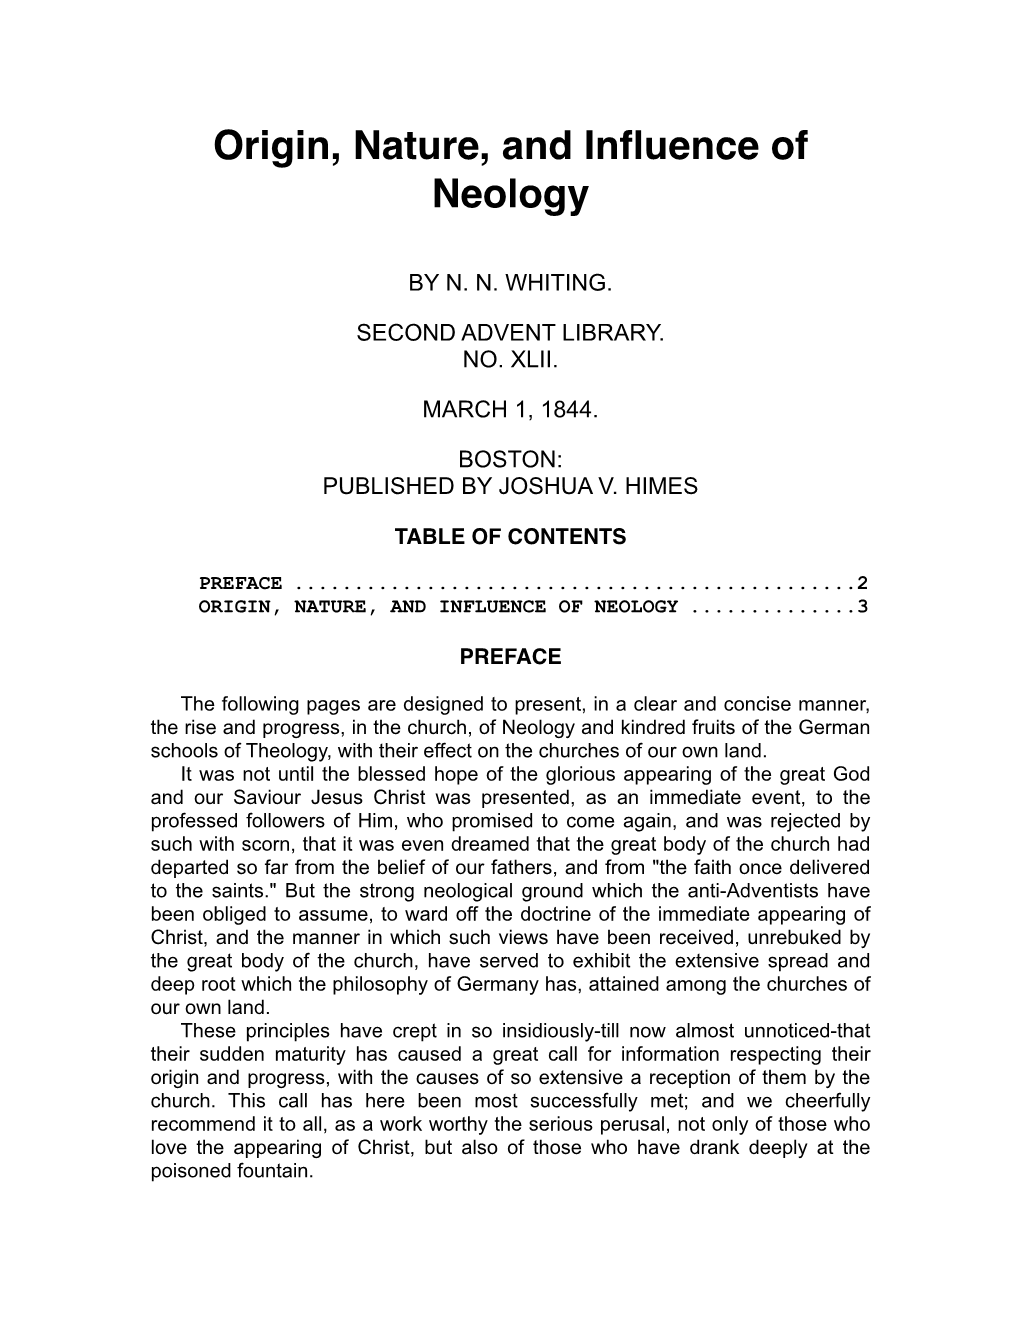 Origin, Nature, and Influence of Neology.Pdf